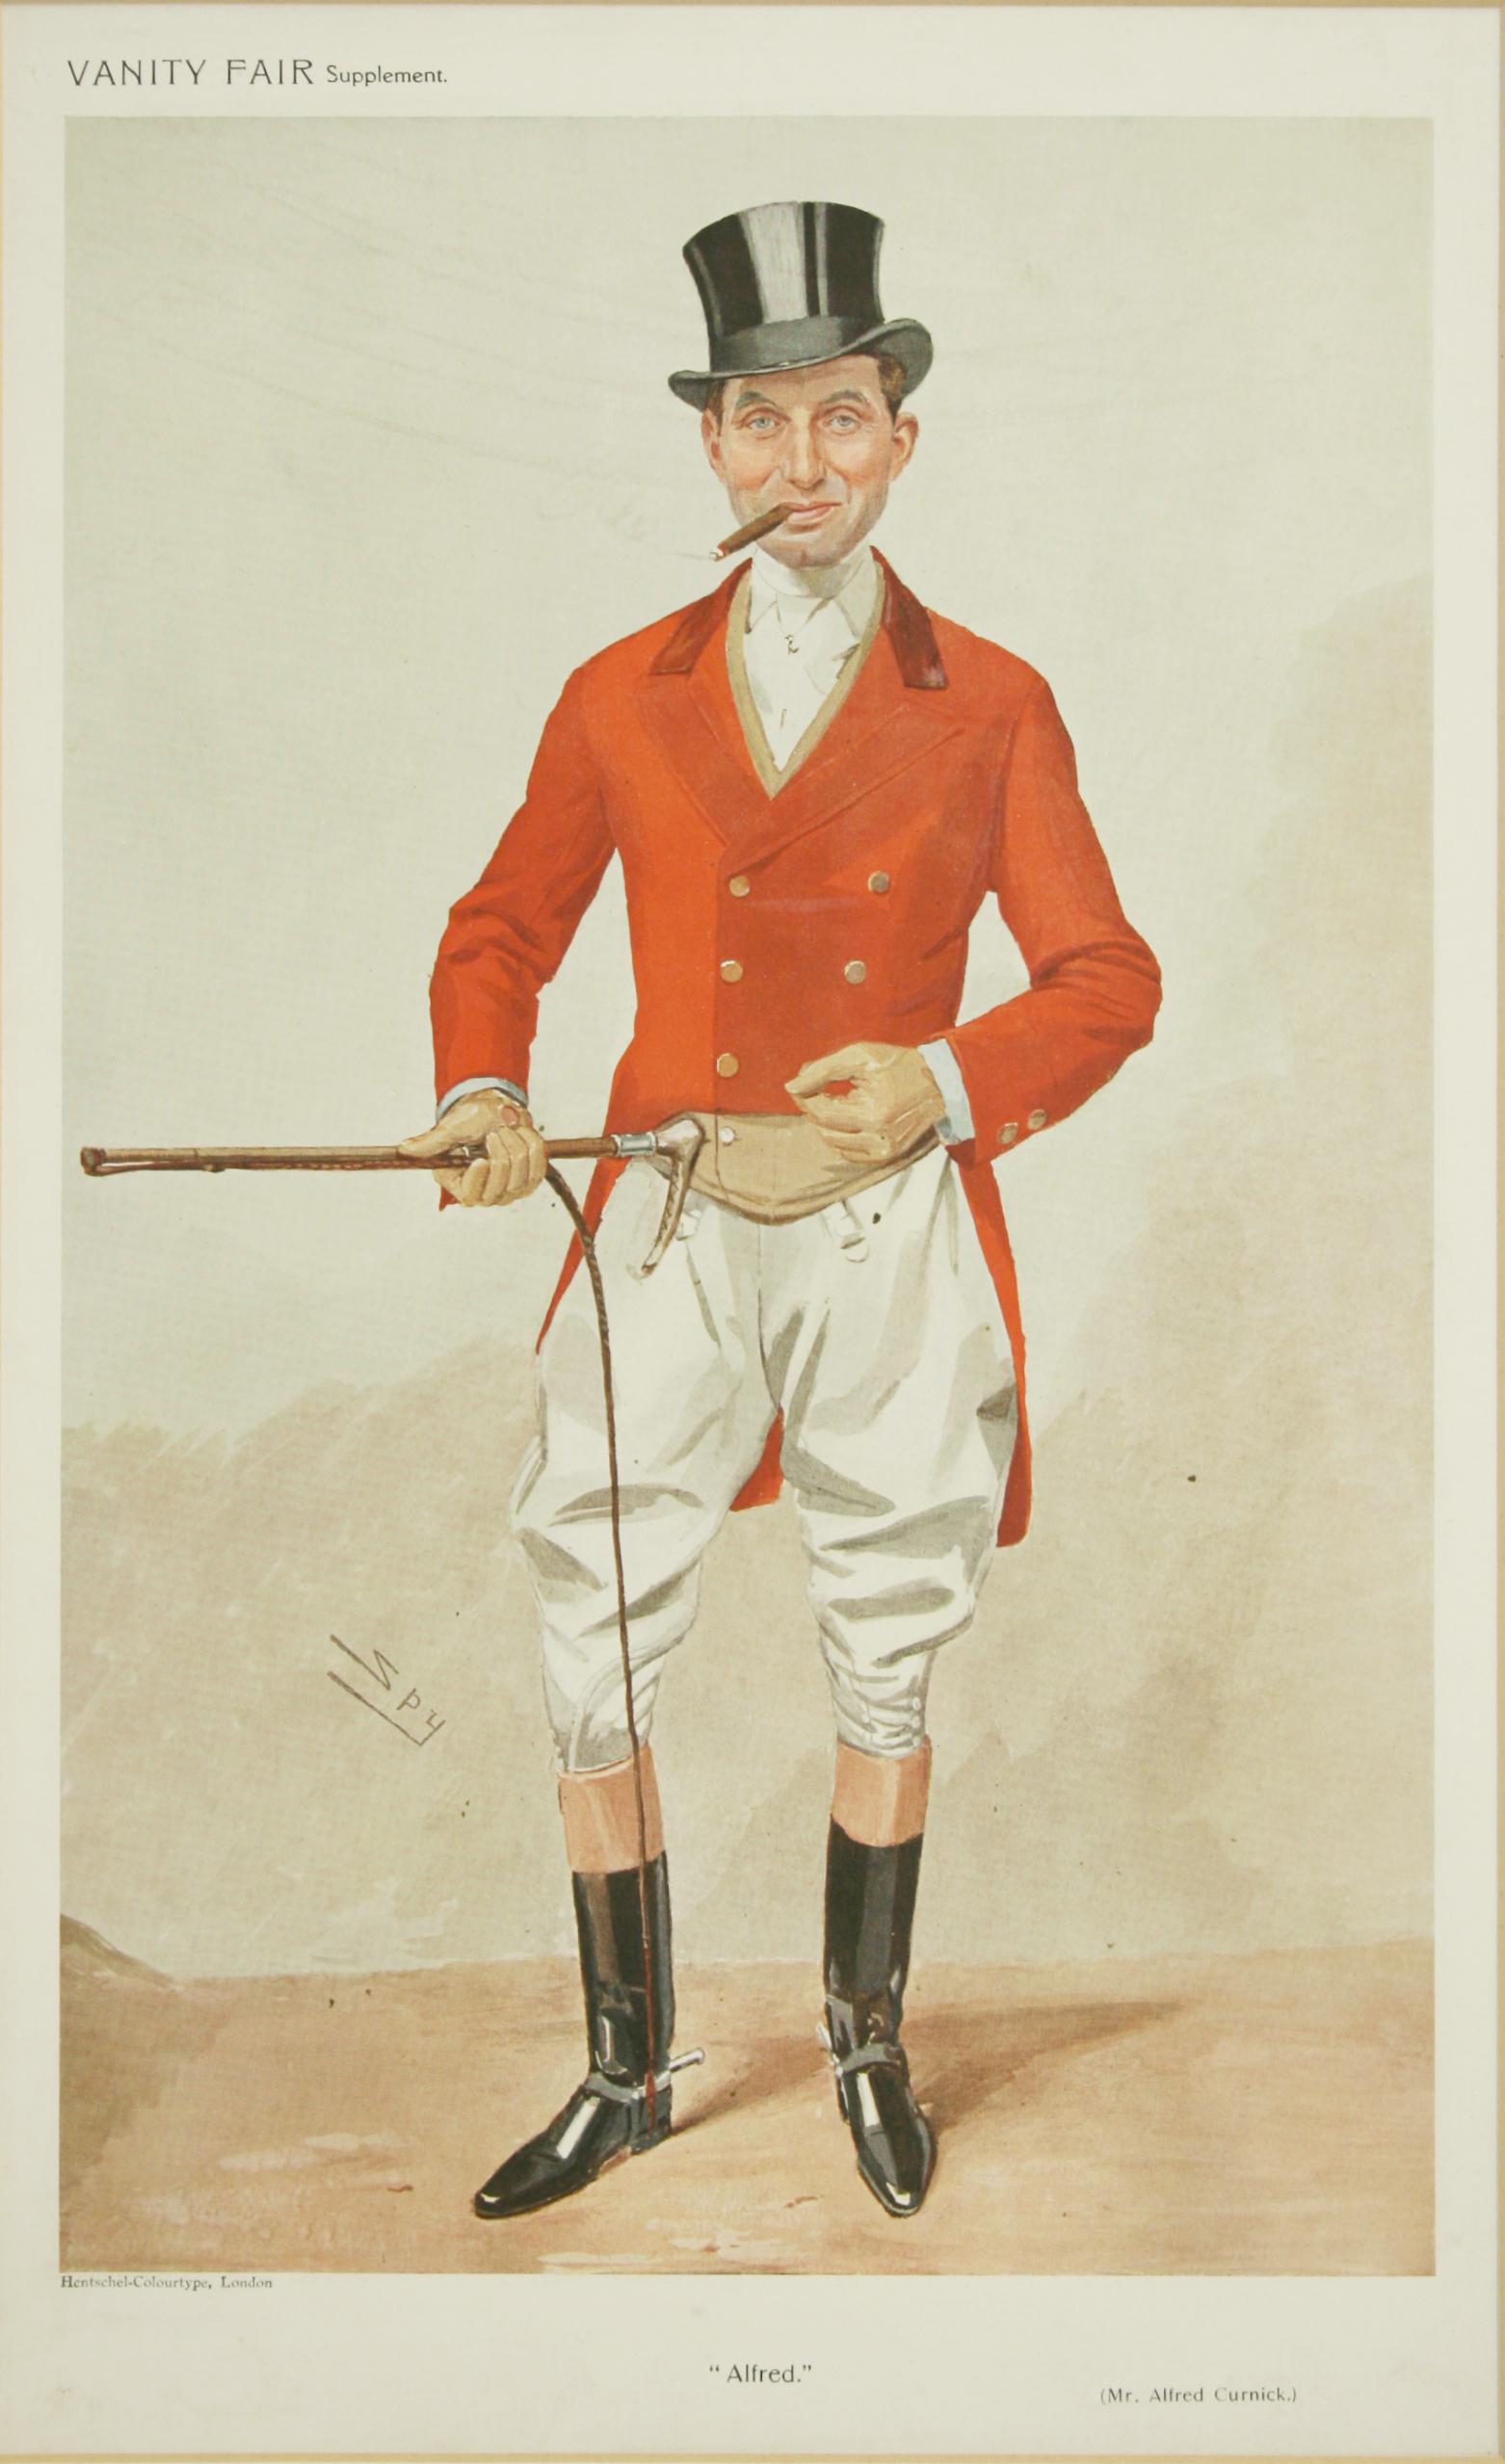 Vanity Fair fox hunting print 'Alfred' after Spy.
A mounted chromolithograph print published 30th June, 1909, by Hentschel-Colourtype, London, for Vanity Fair. The picture is titled 'Alfred' and is an original print of Mr. Alfred Curnick by Spy.